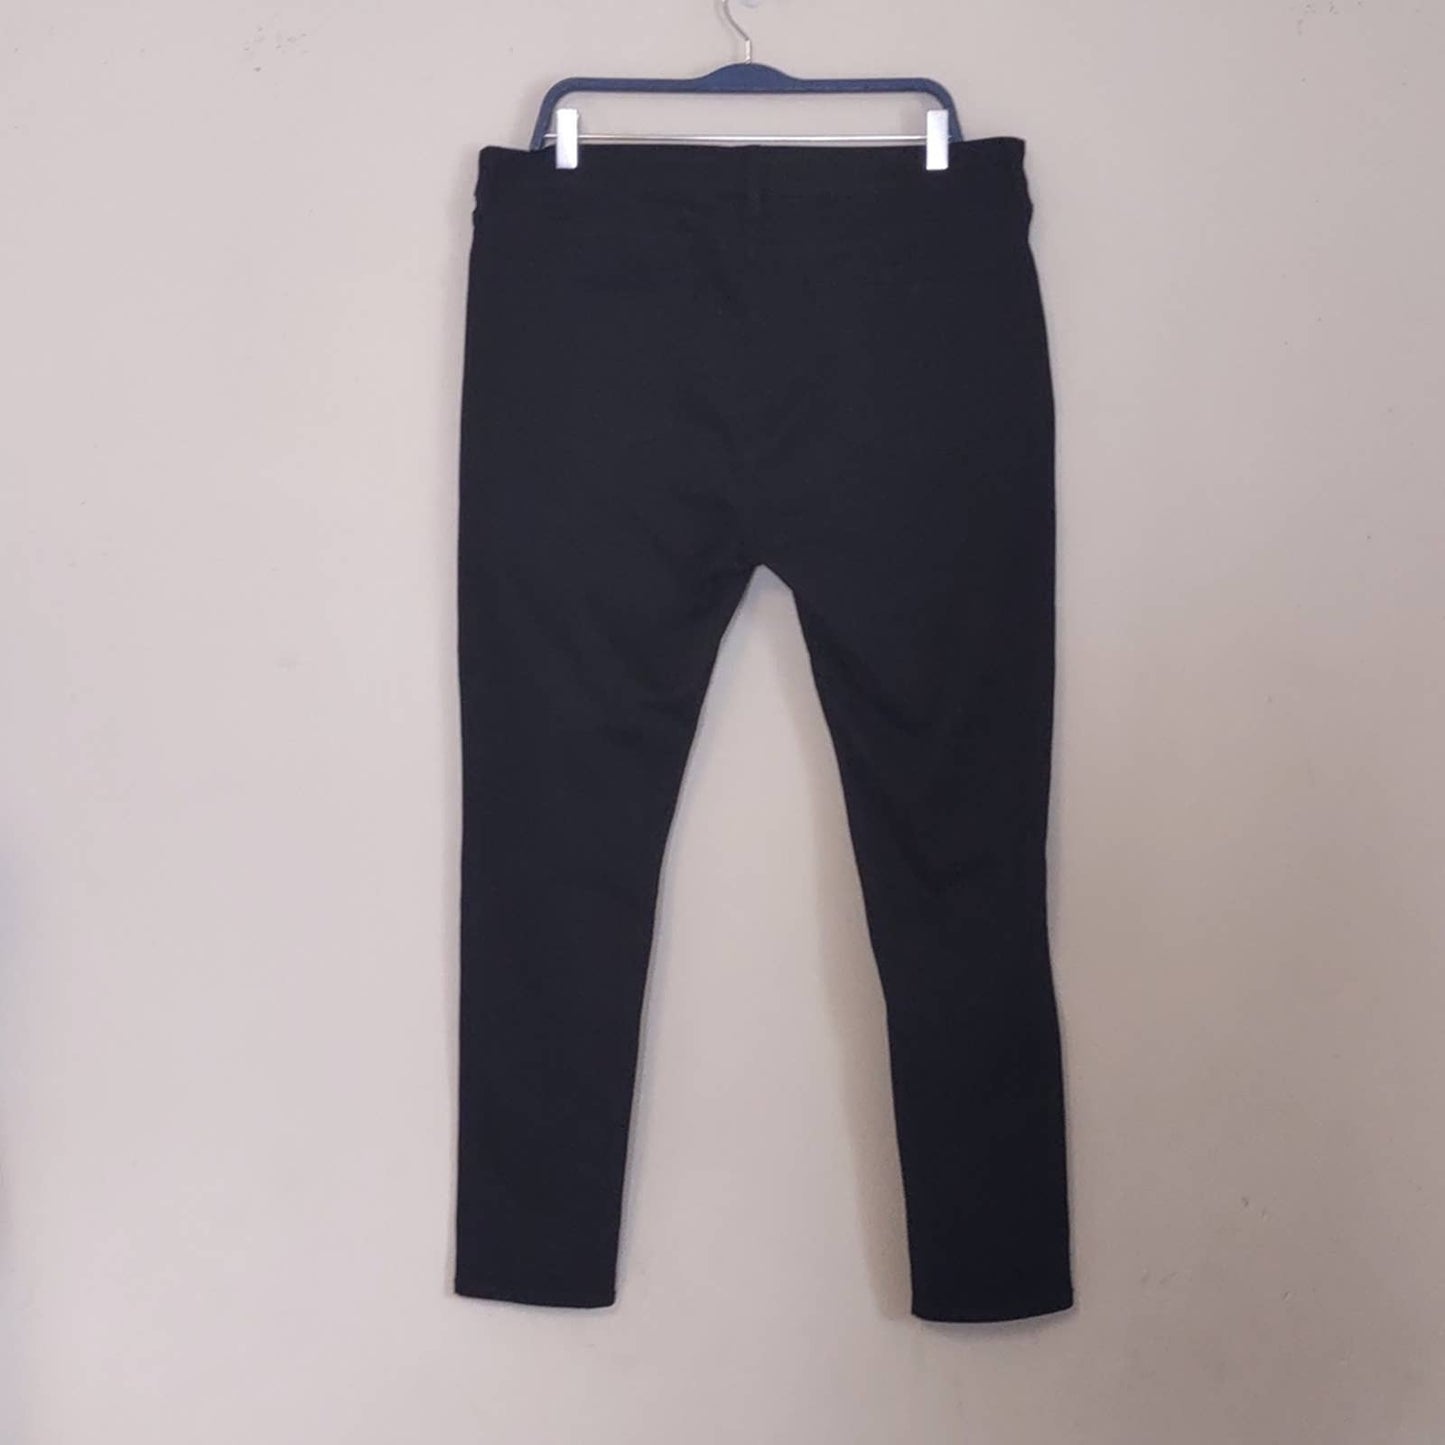 a.n.a - Mid Rise Skinny Jegging Jeans 18 Black